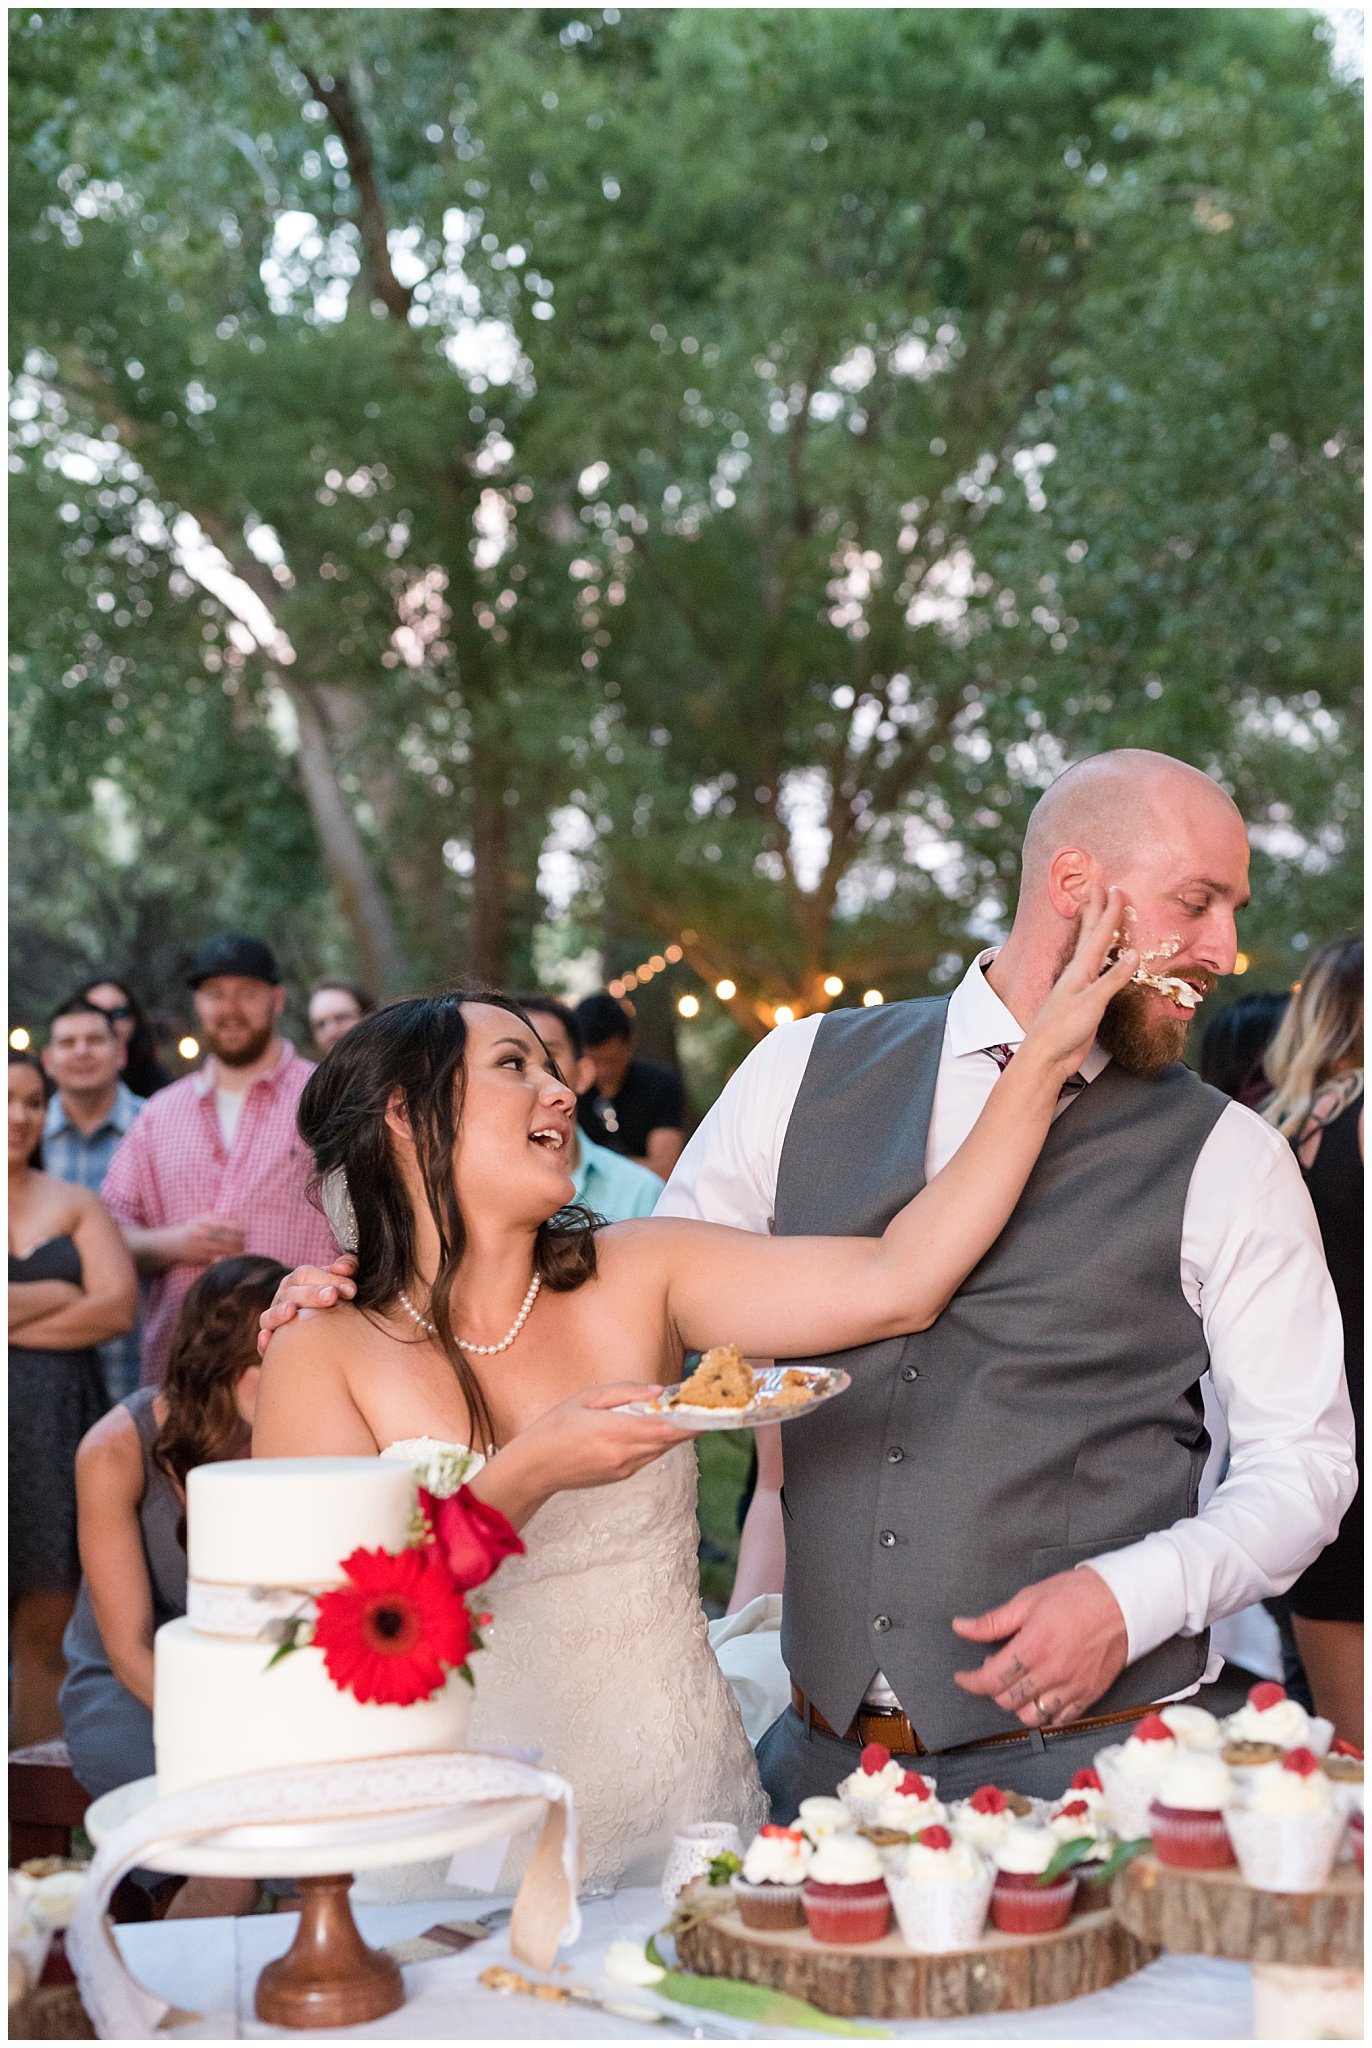 Bride slams cake in grooms face during cake cutting | Red and Grey wedding | Davis County Outdoor Wedding | Jessie and Dallin Photography